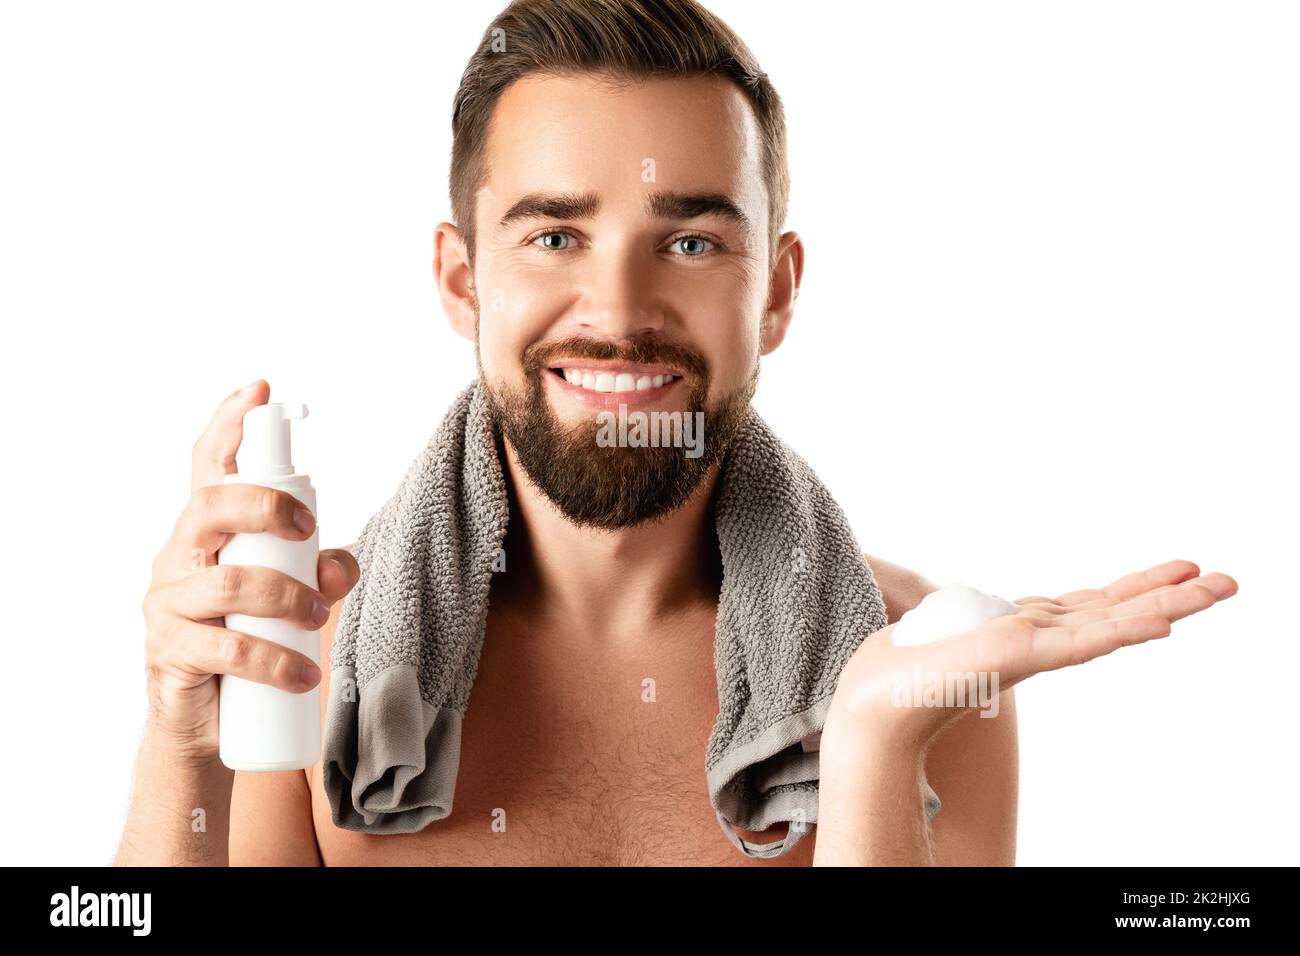 Handsome man with a cleansing or shaving foam Stock Photo